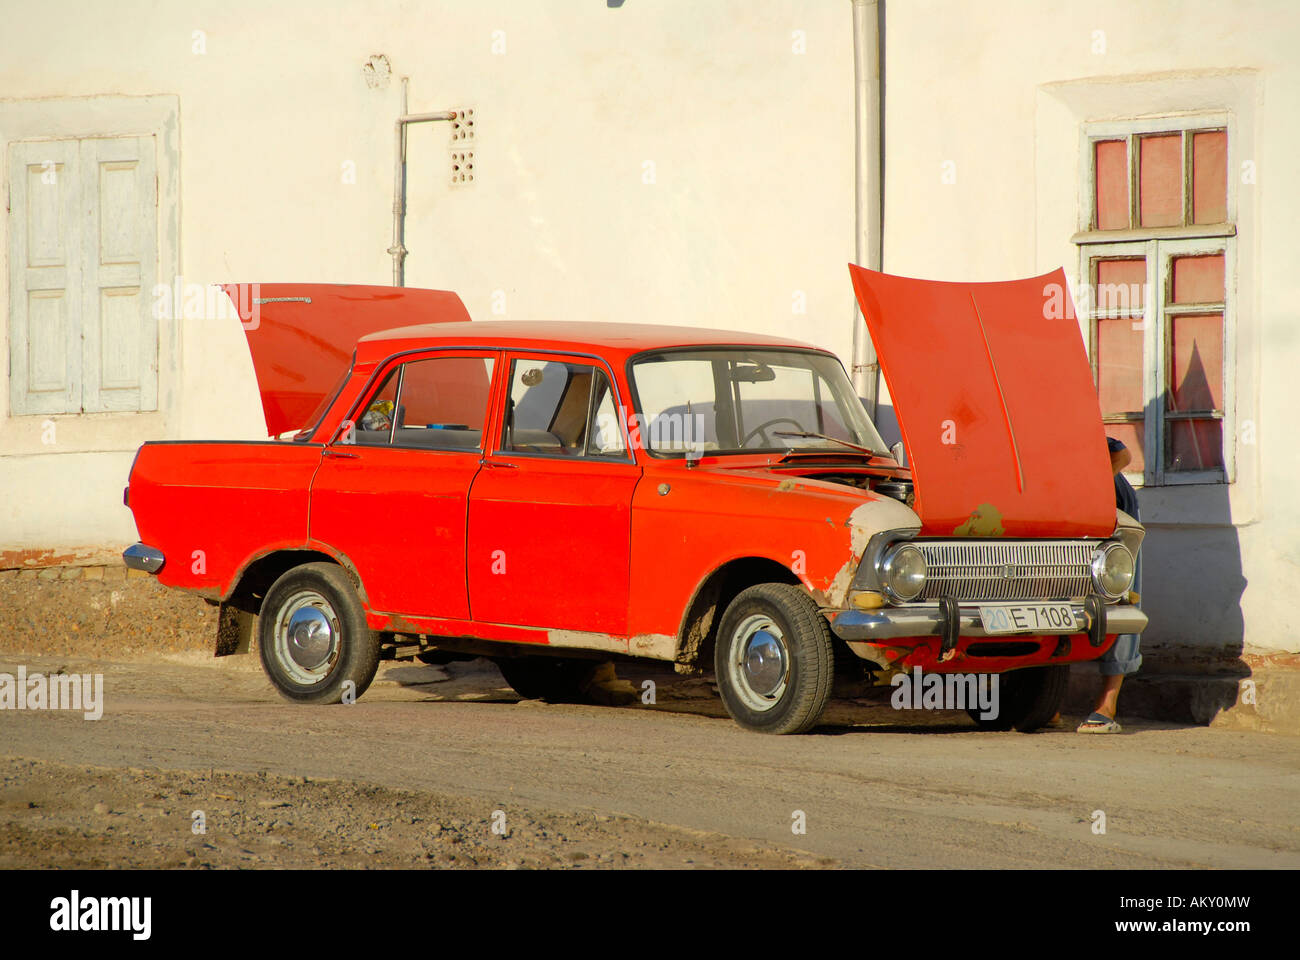 Old red Russian car Moskvitch with open trunk and hood Bukhara Uzbekistan Stock Photo